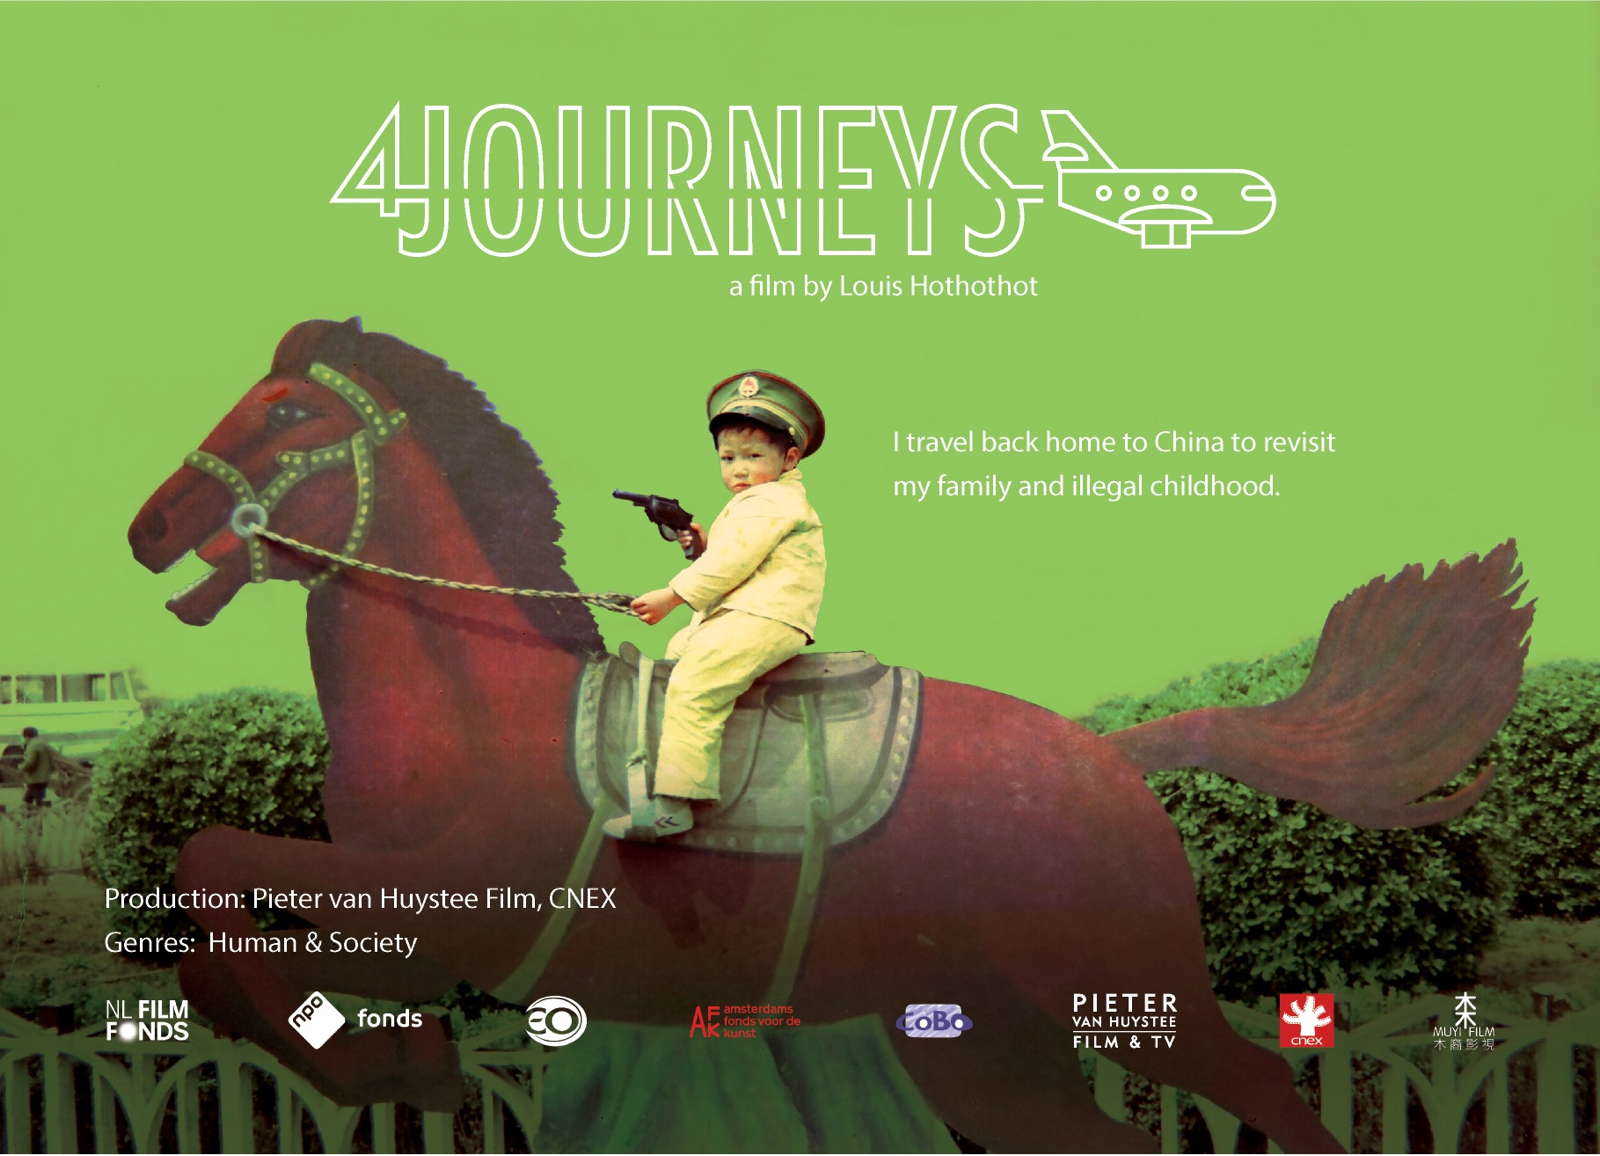 FOUR JOURNEYS - a film by Louis Hothothot